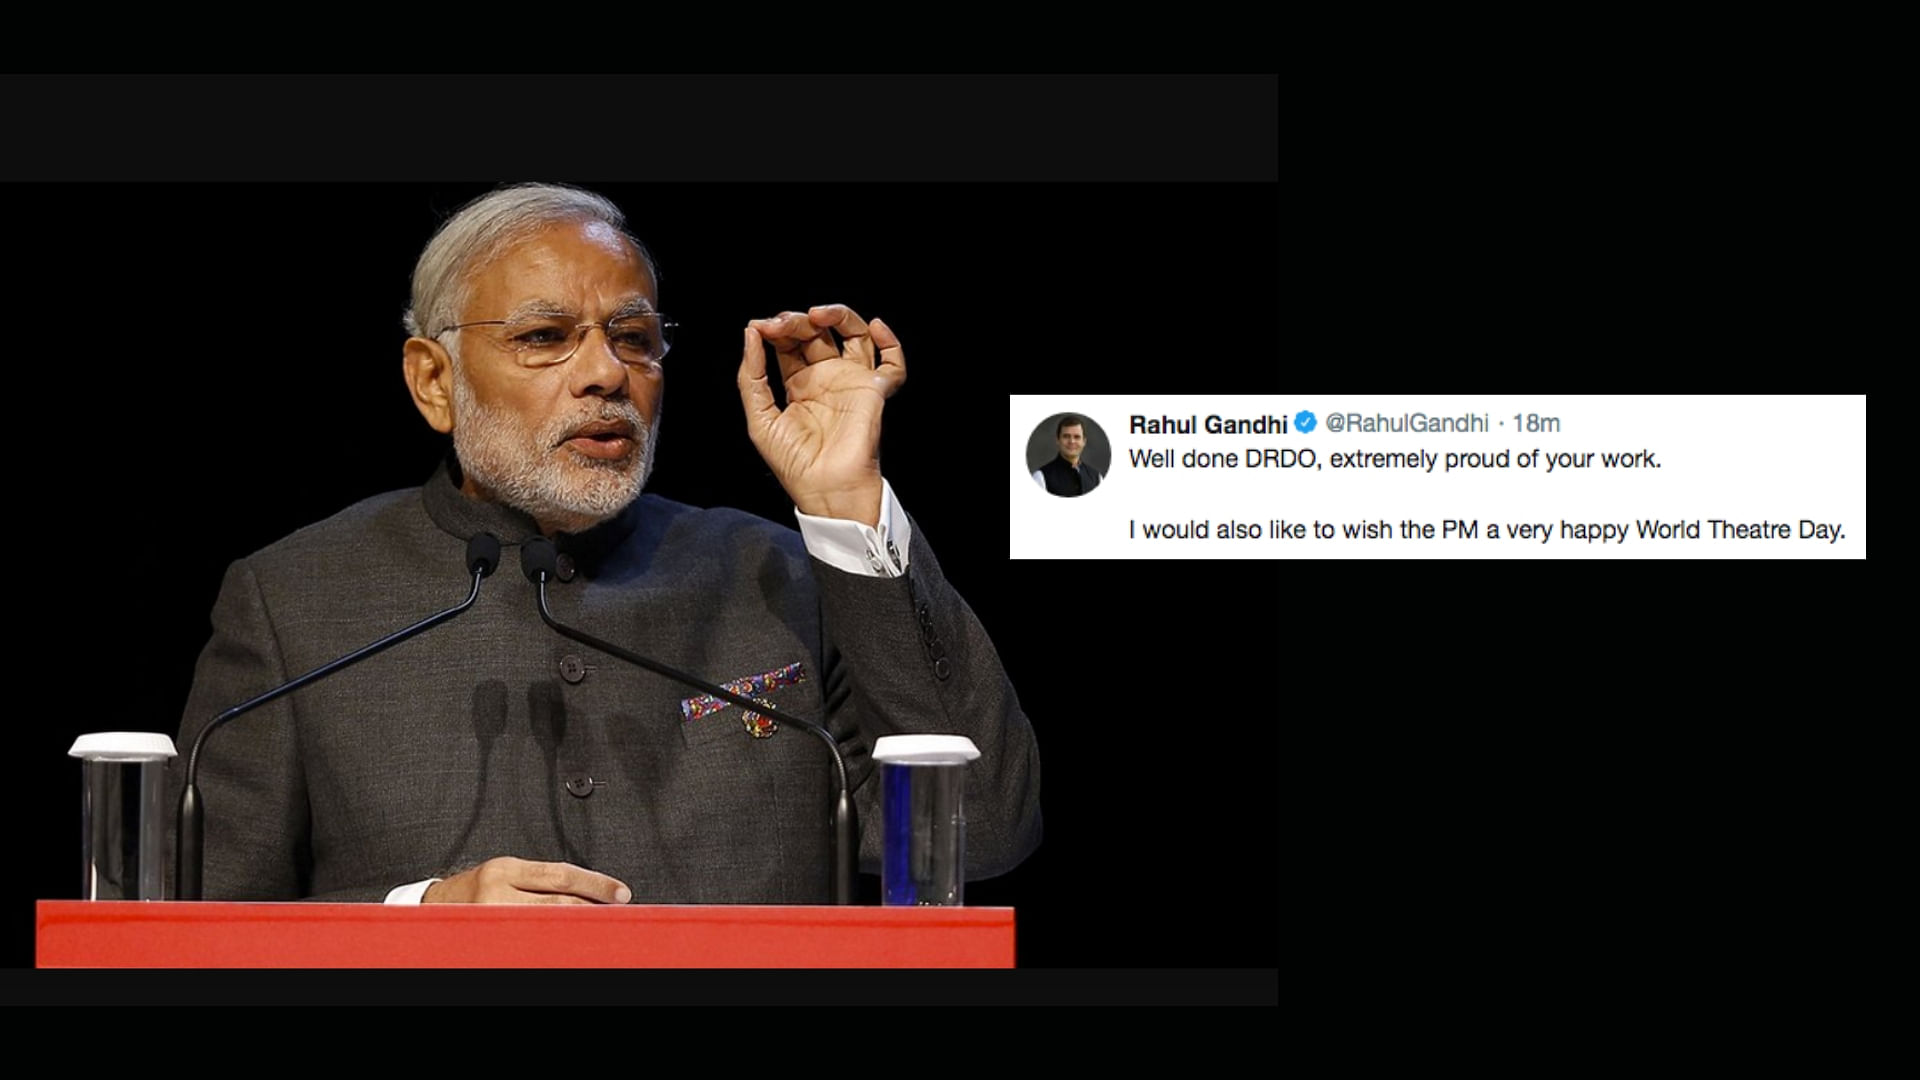 Prime Minister Narendra Modi on 27 March announced that India had demonstrated anti-satellite missile capability by shooting down a live satellite.